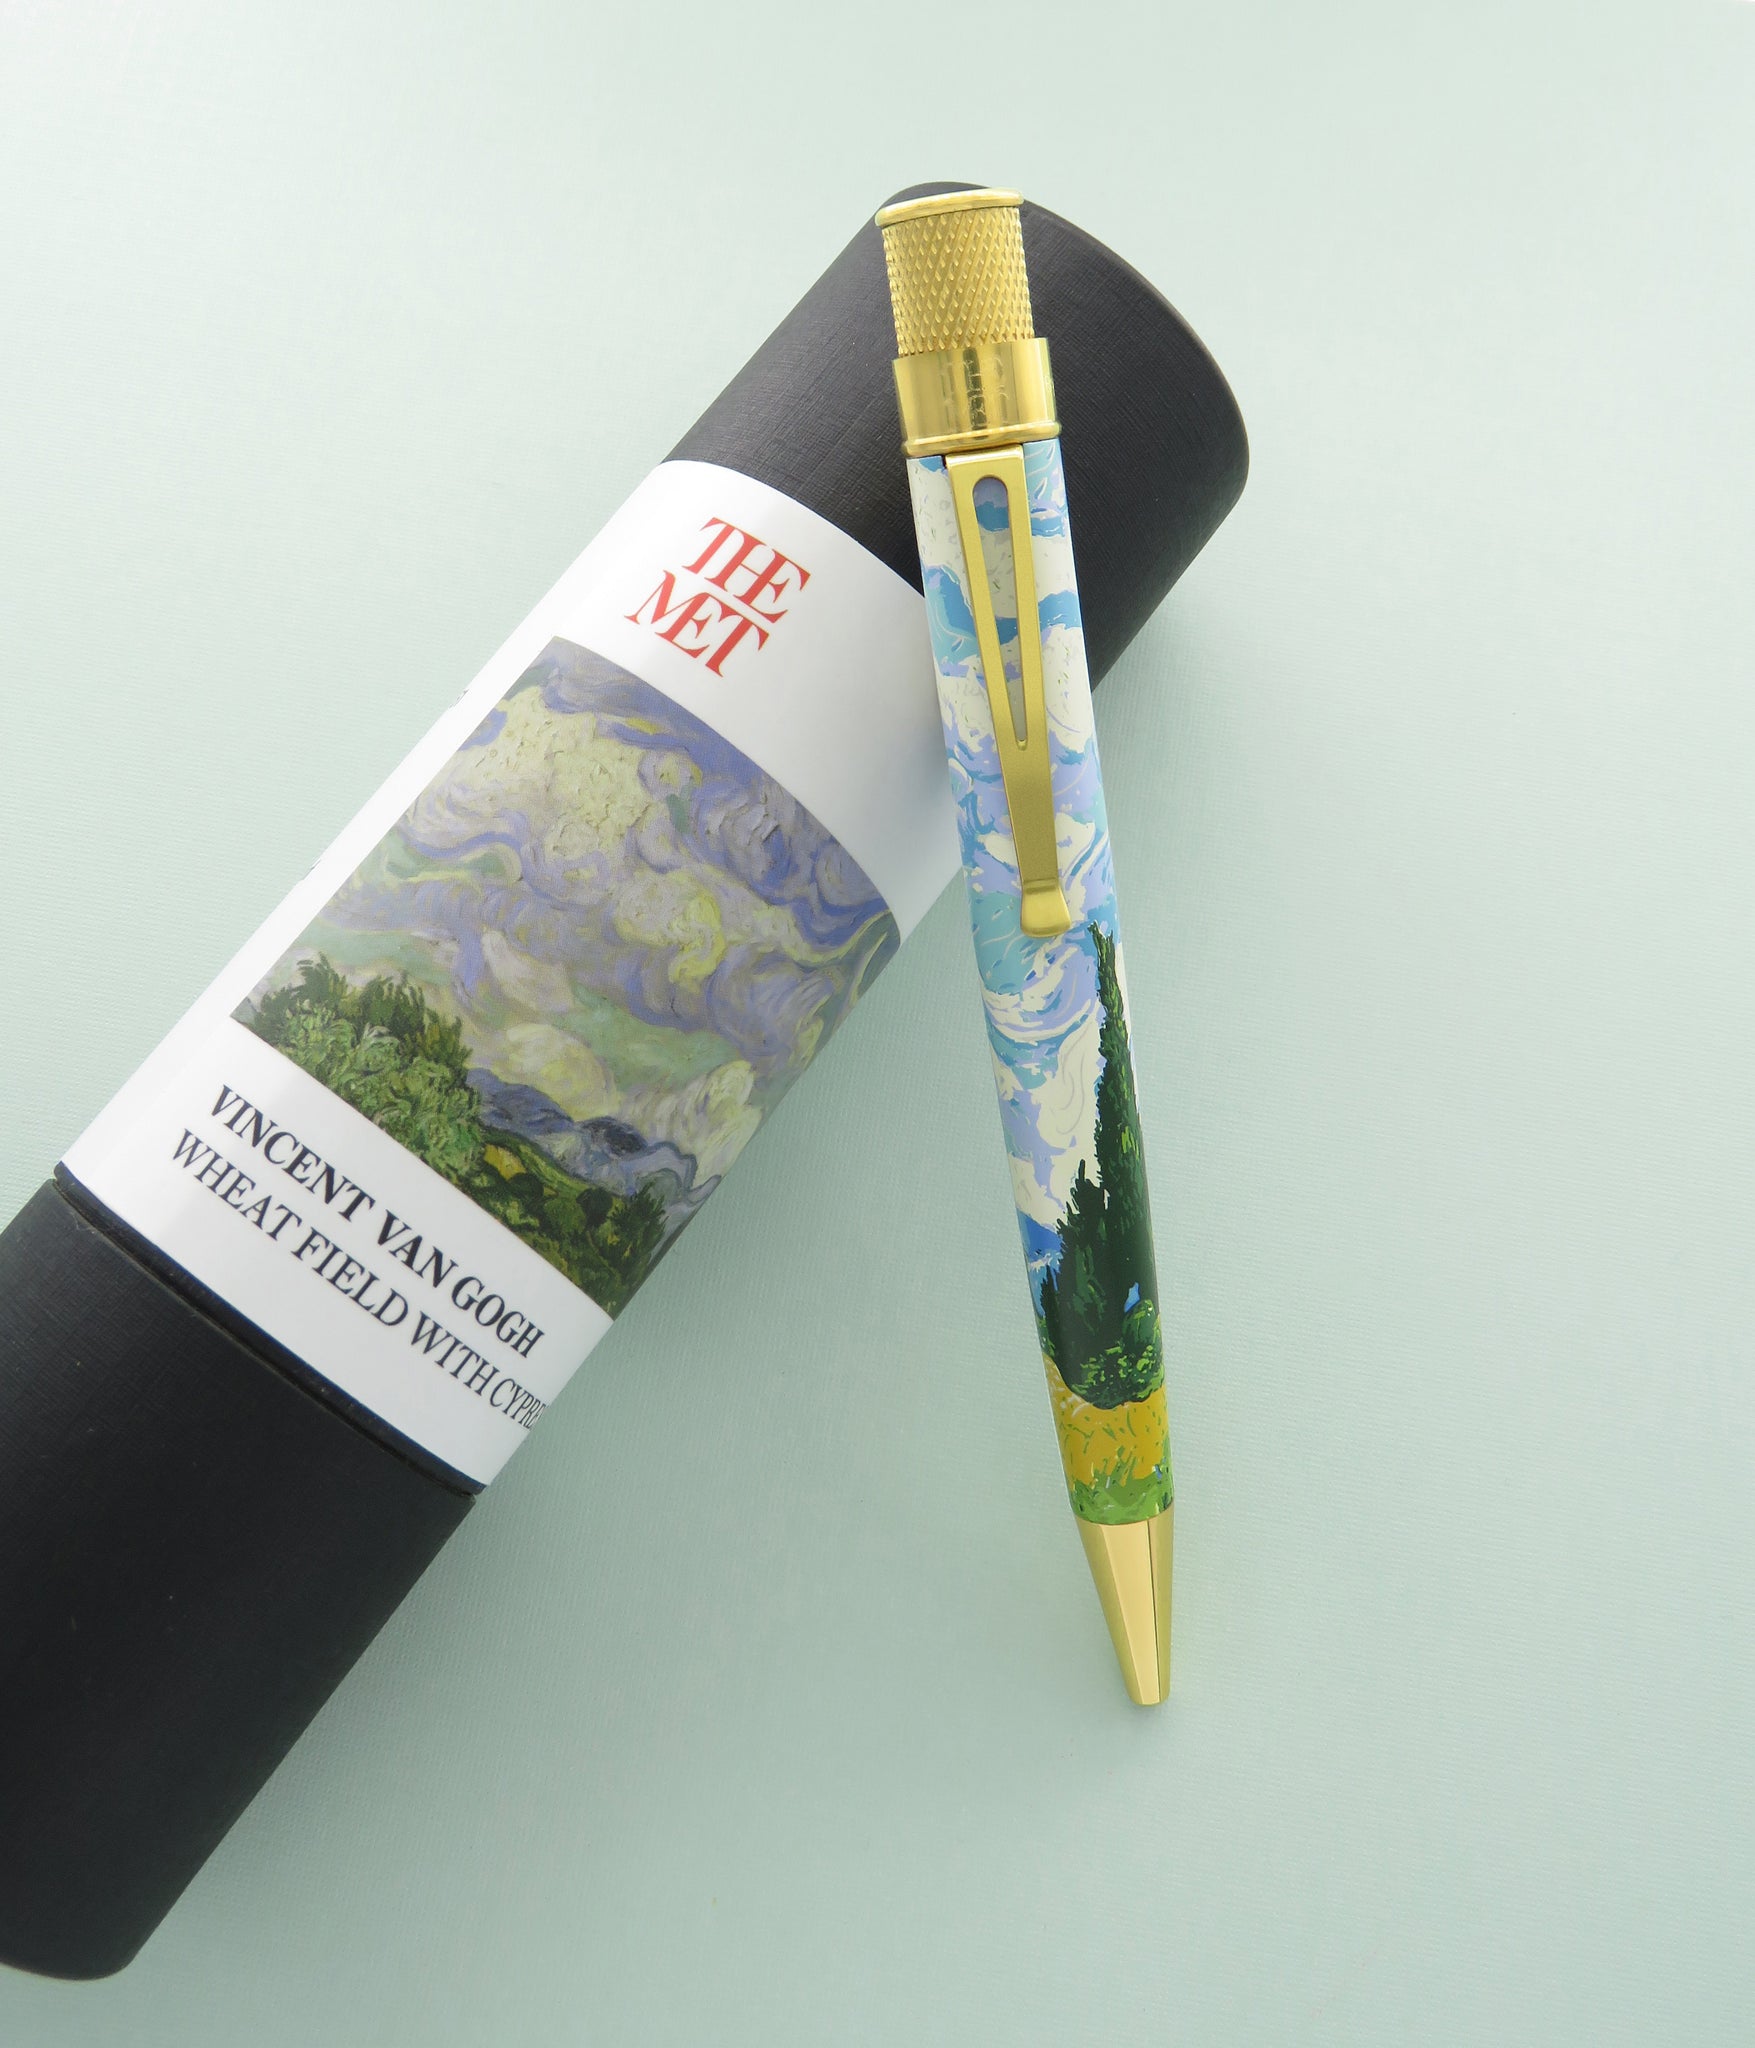 Van Gogh Wheat Fields & Cypresses Rollerball from Retro 51